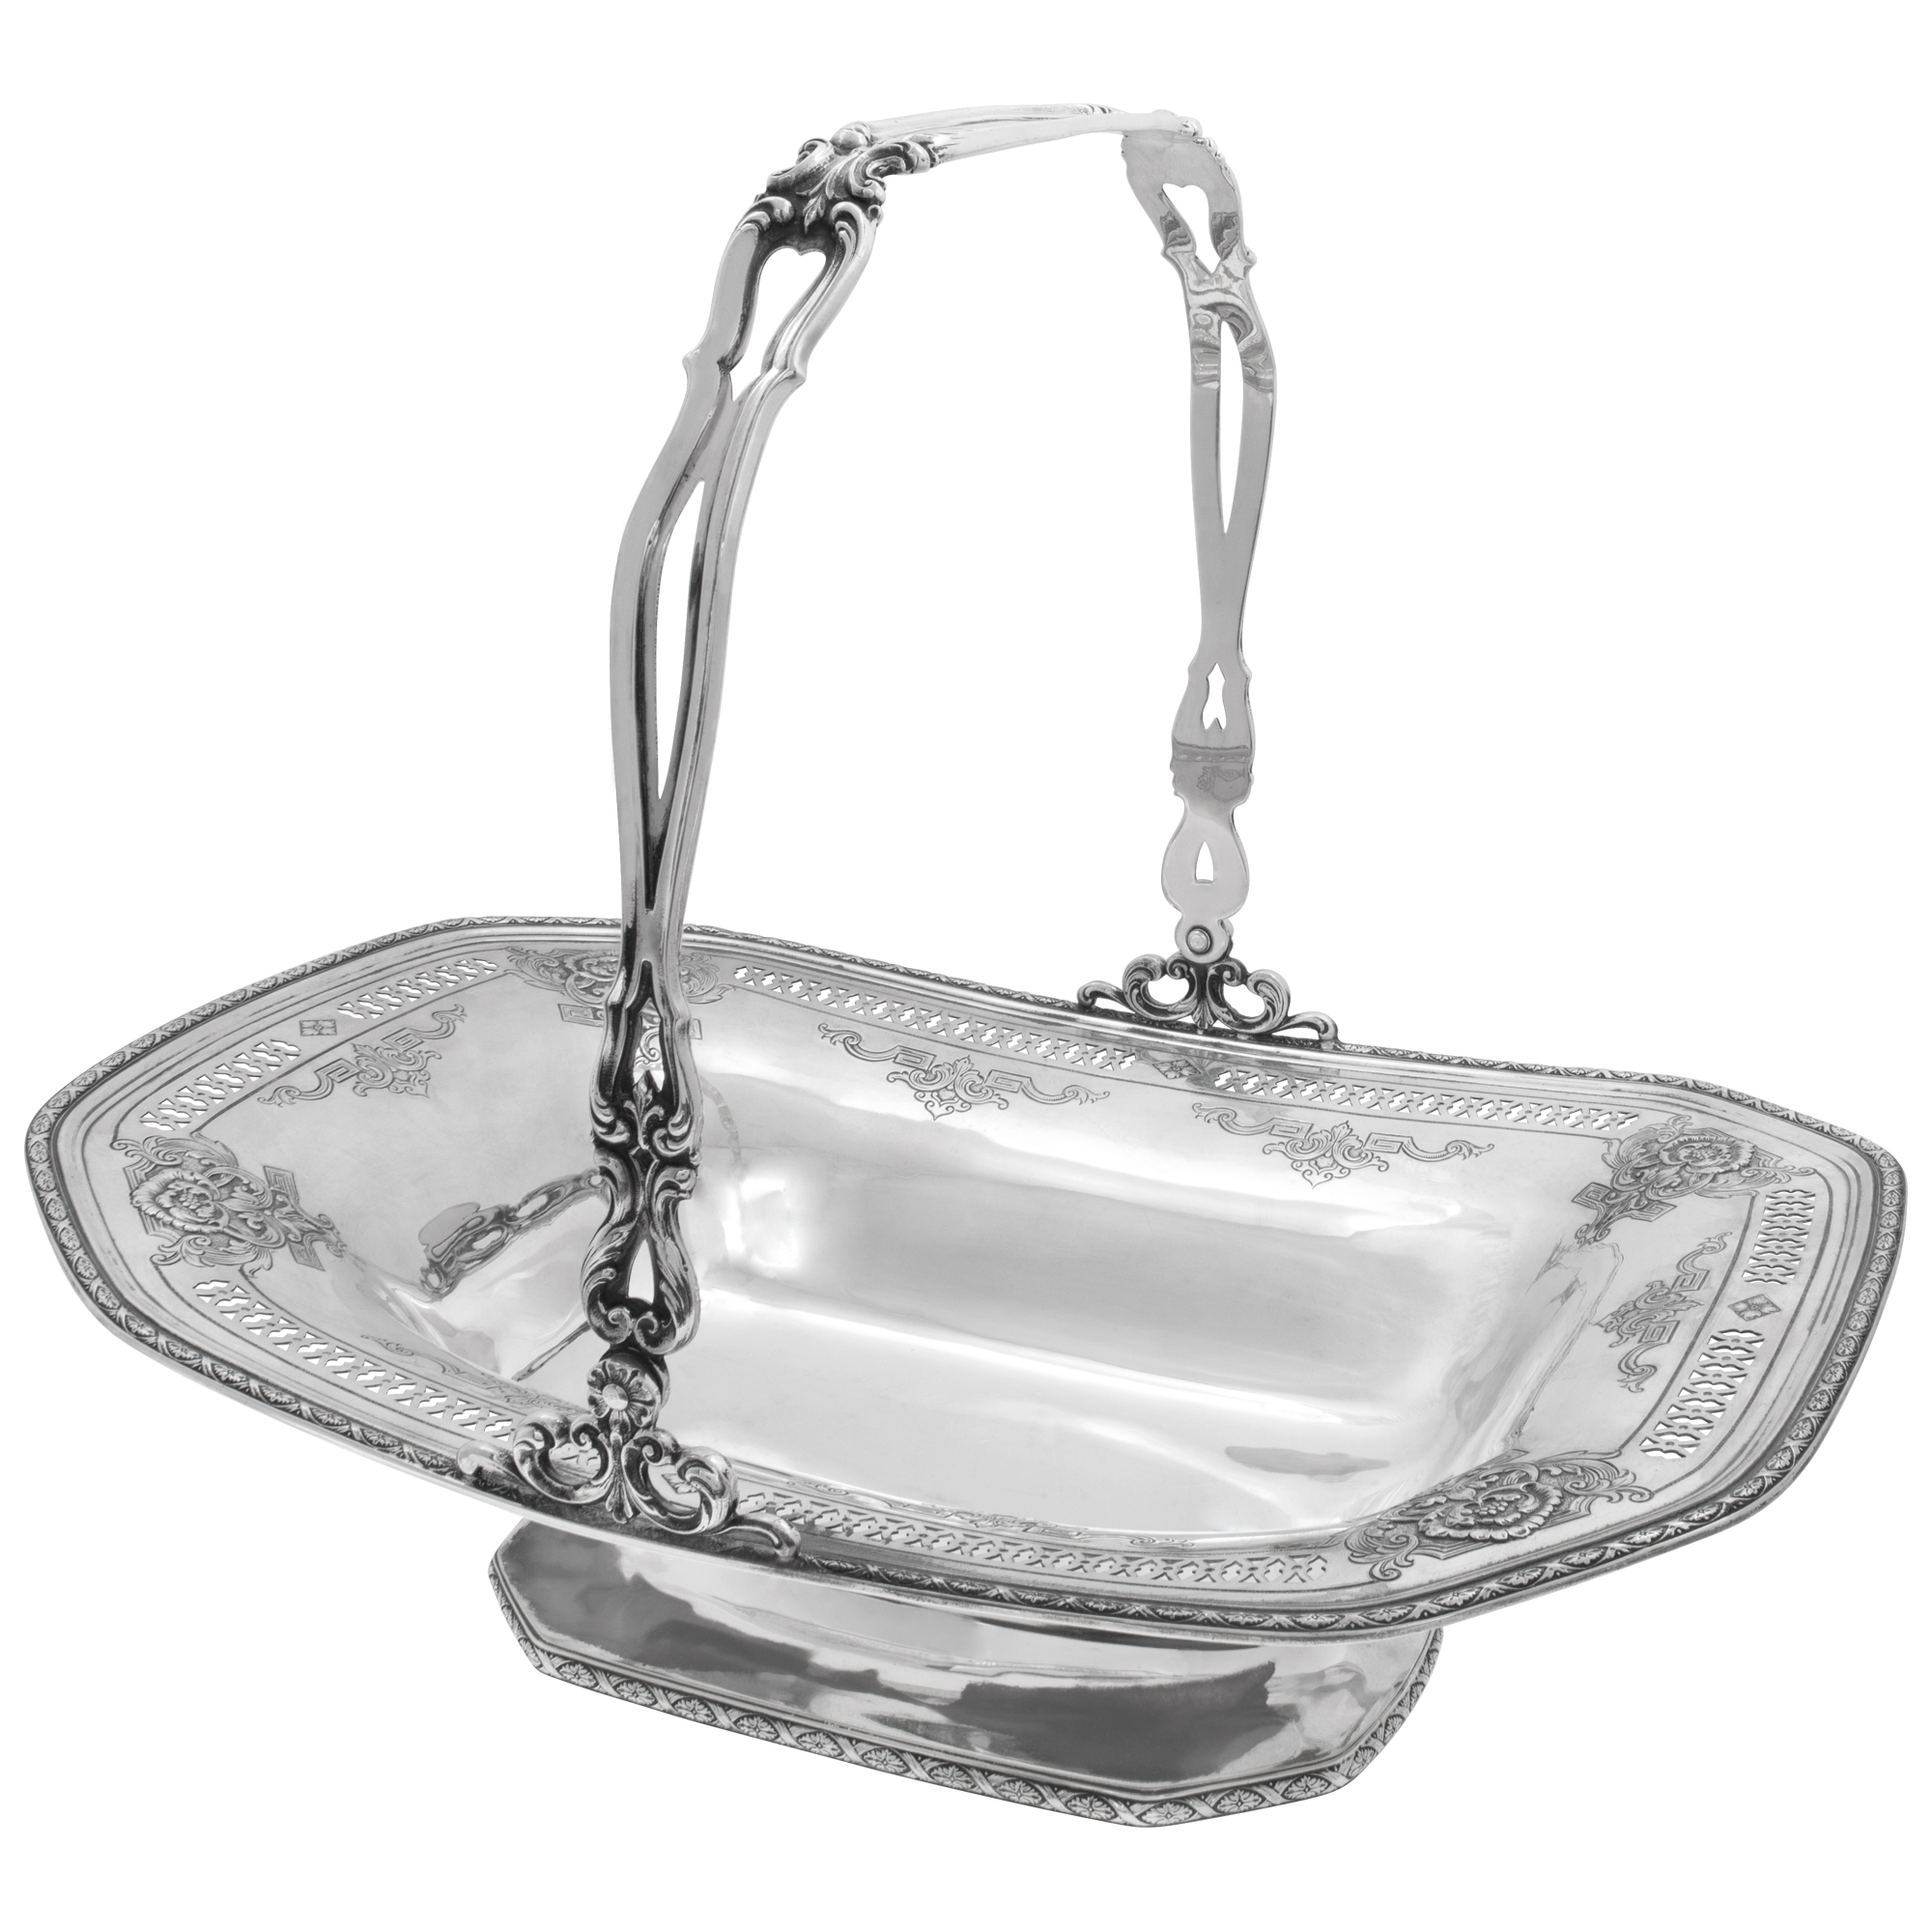 Antique D'ORLEANS or LOUIS XIV pattern, footed sterling silver center piece basket with handle by Towle Silversmiths. Circa 1923. image 1